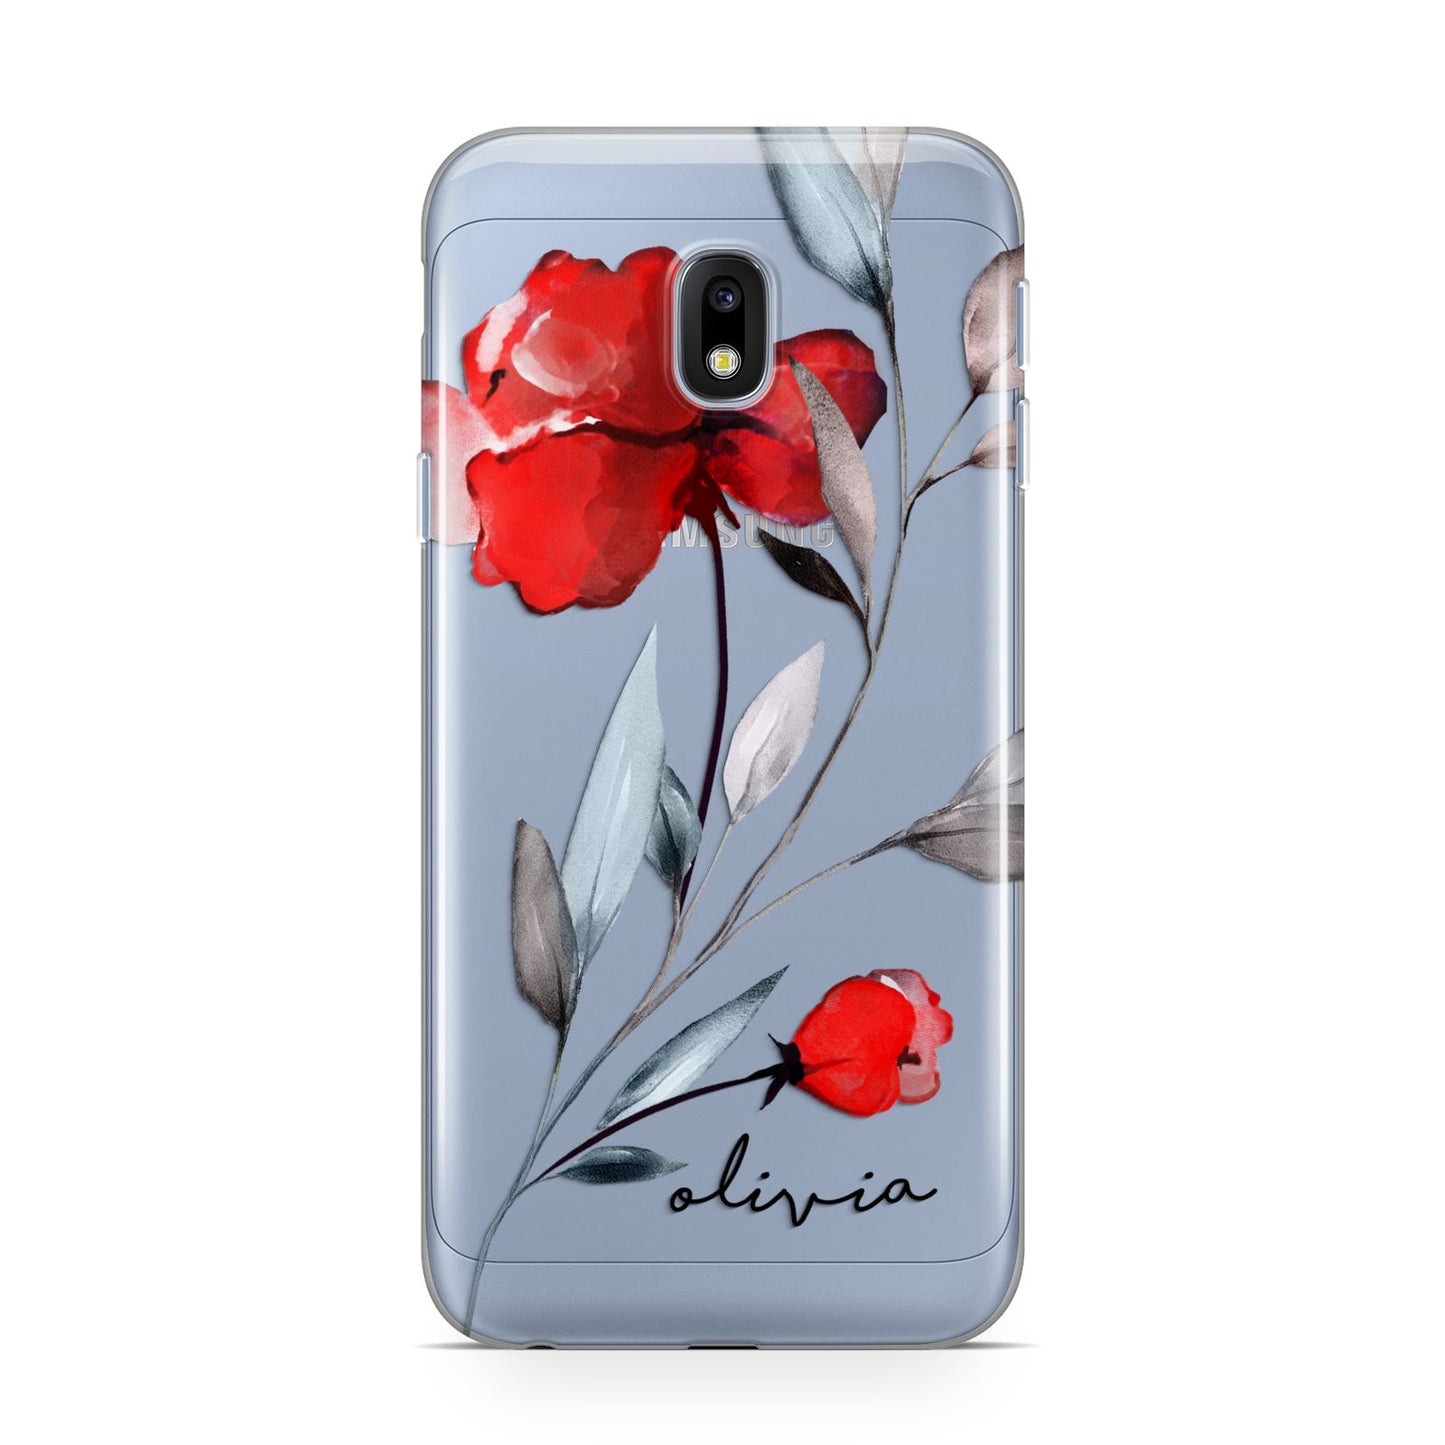 Personalised Red Roses Floral Name Samsung Galaxy J3 2017 Case